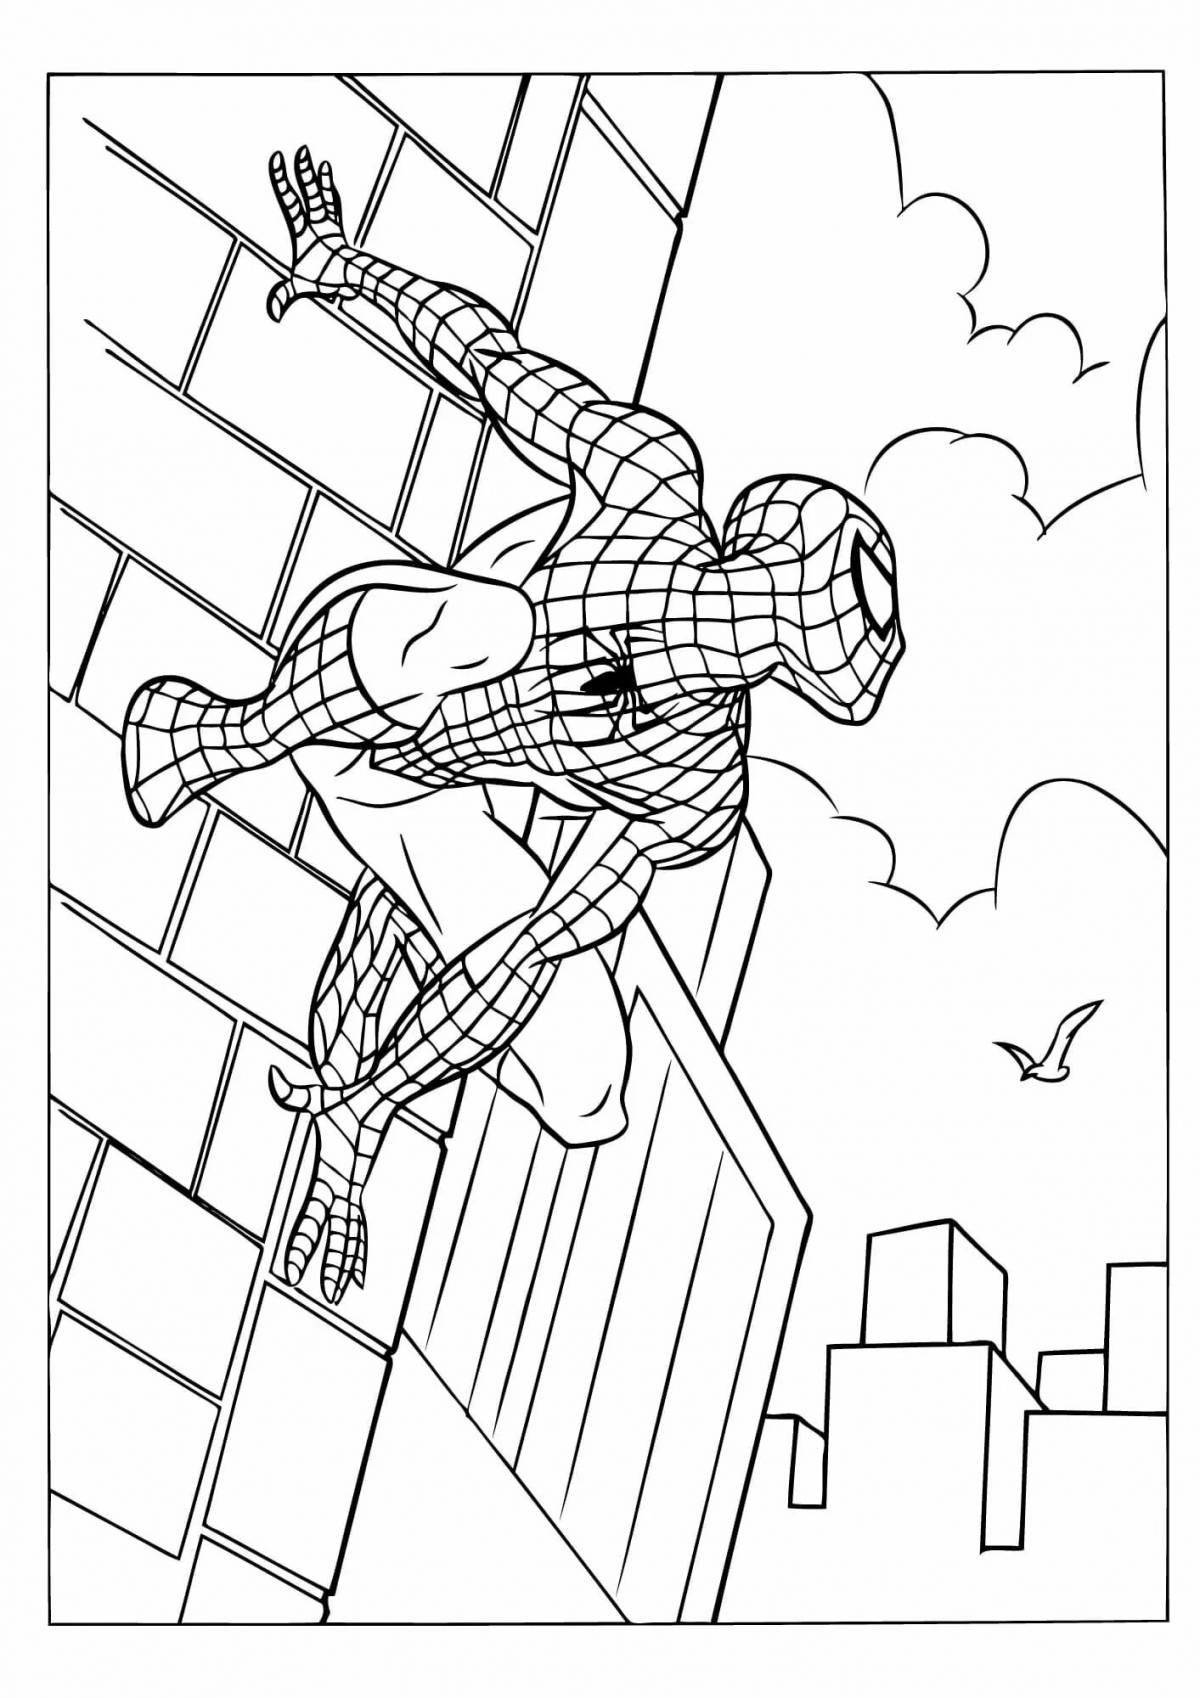 Outstanding spiderman coloring page for 5 year olds